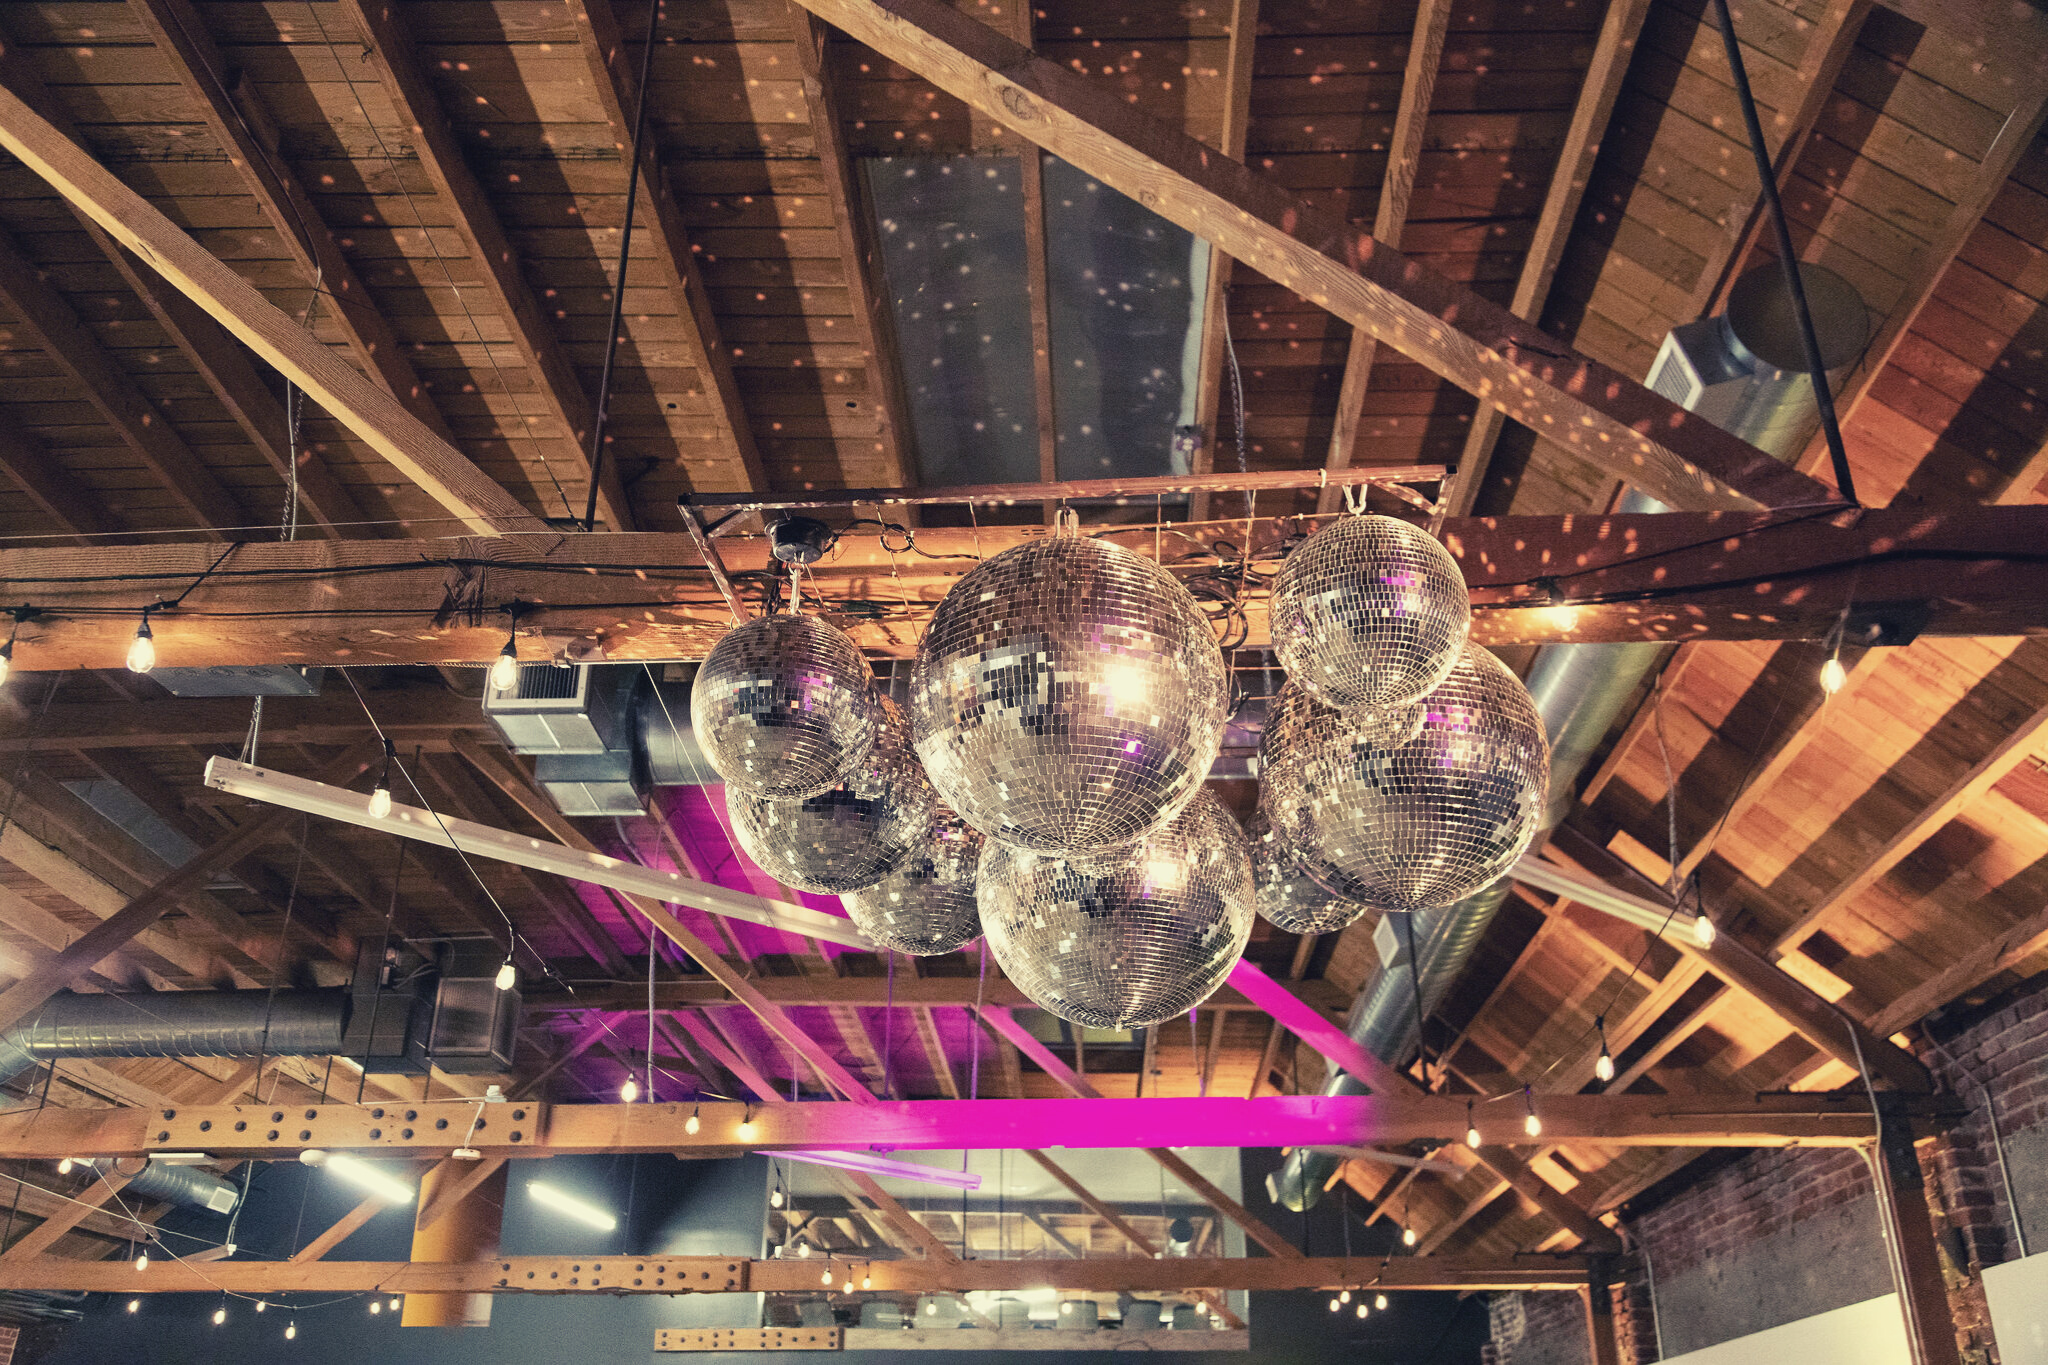 MG Studio Wedding Event Space Downtown Los Angeles Renovated Warehouse Exposed Brick Wood Beams Concrete Modern Industrial Chic - Disco Ball Chandelier